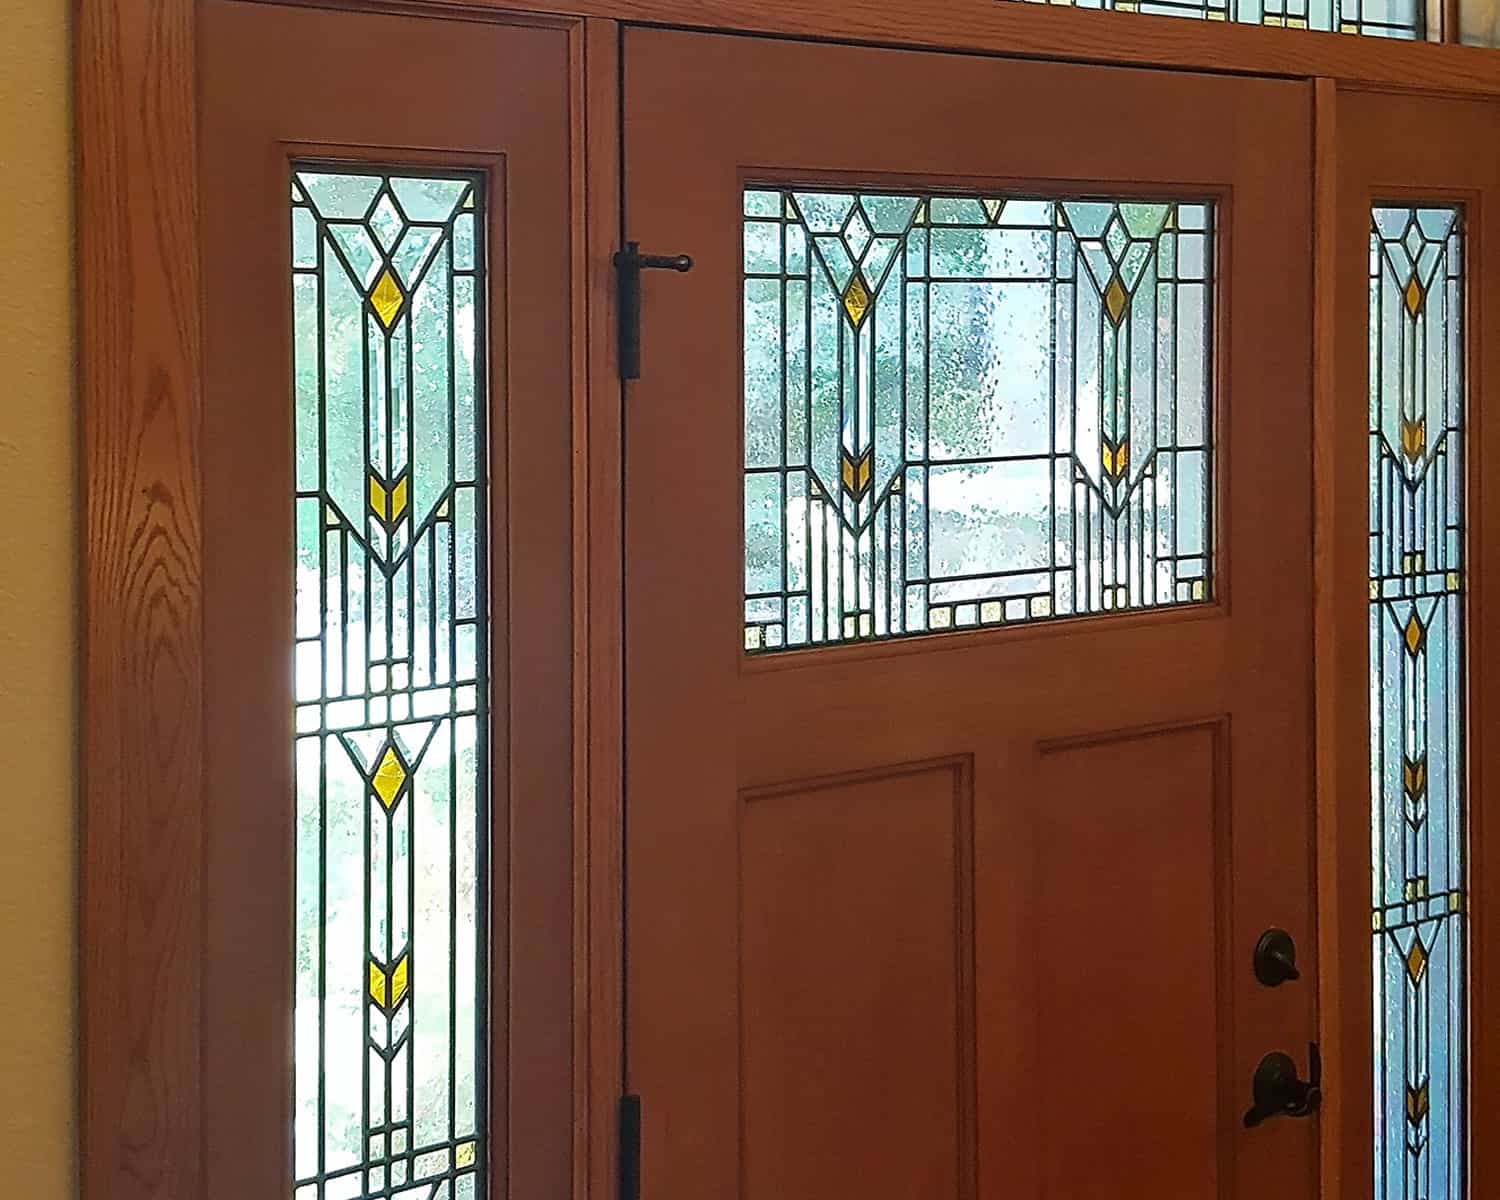 Lemel Homes New Construction - Craftsman - stained glass door detail